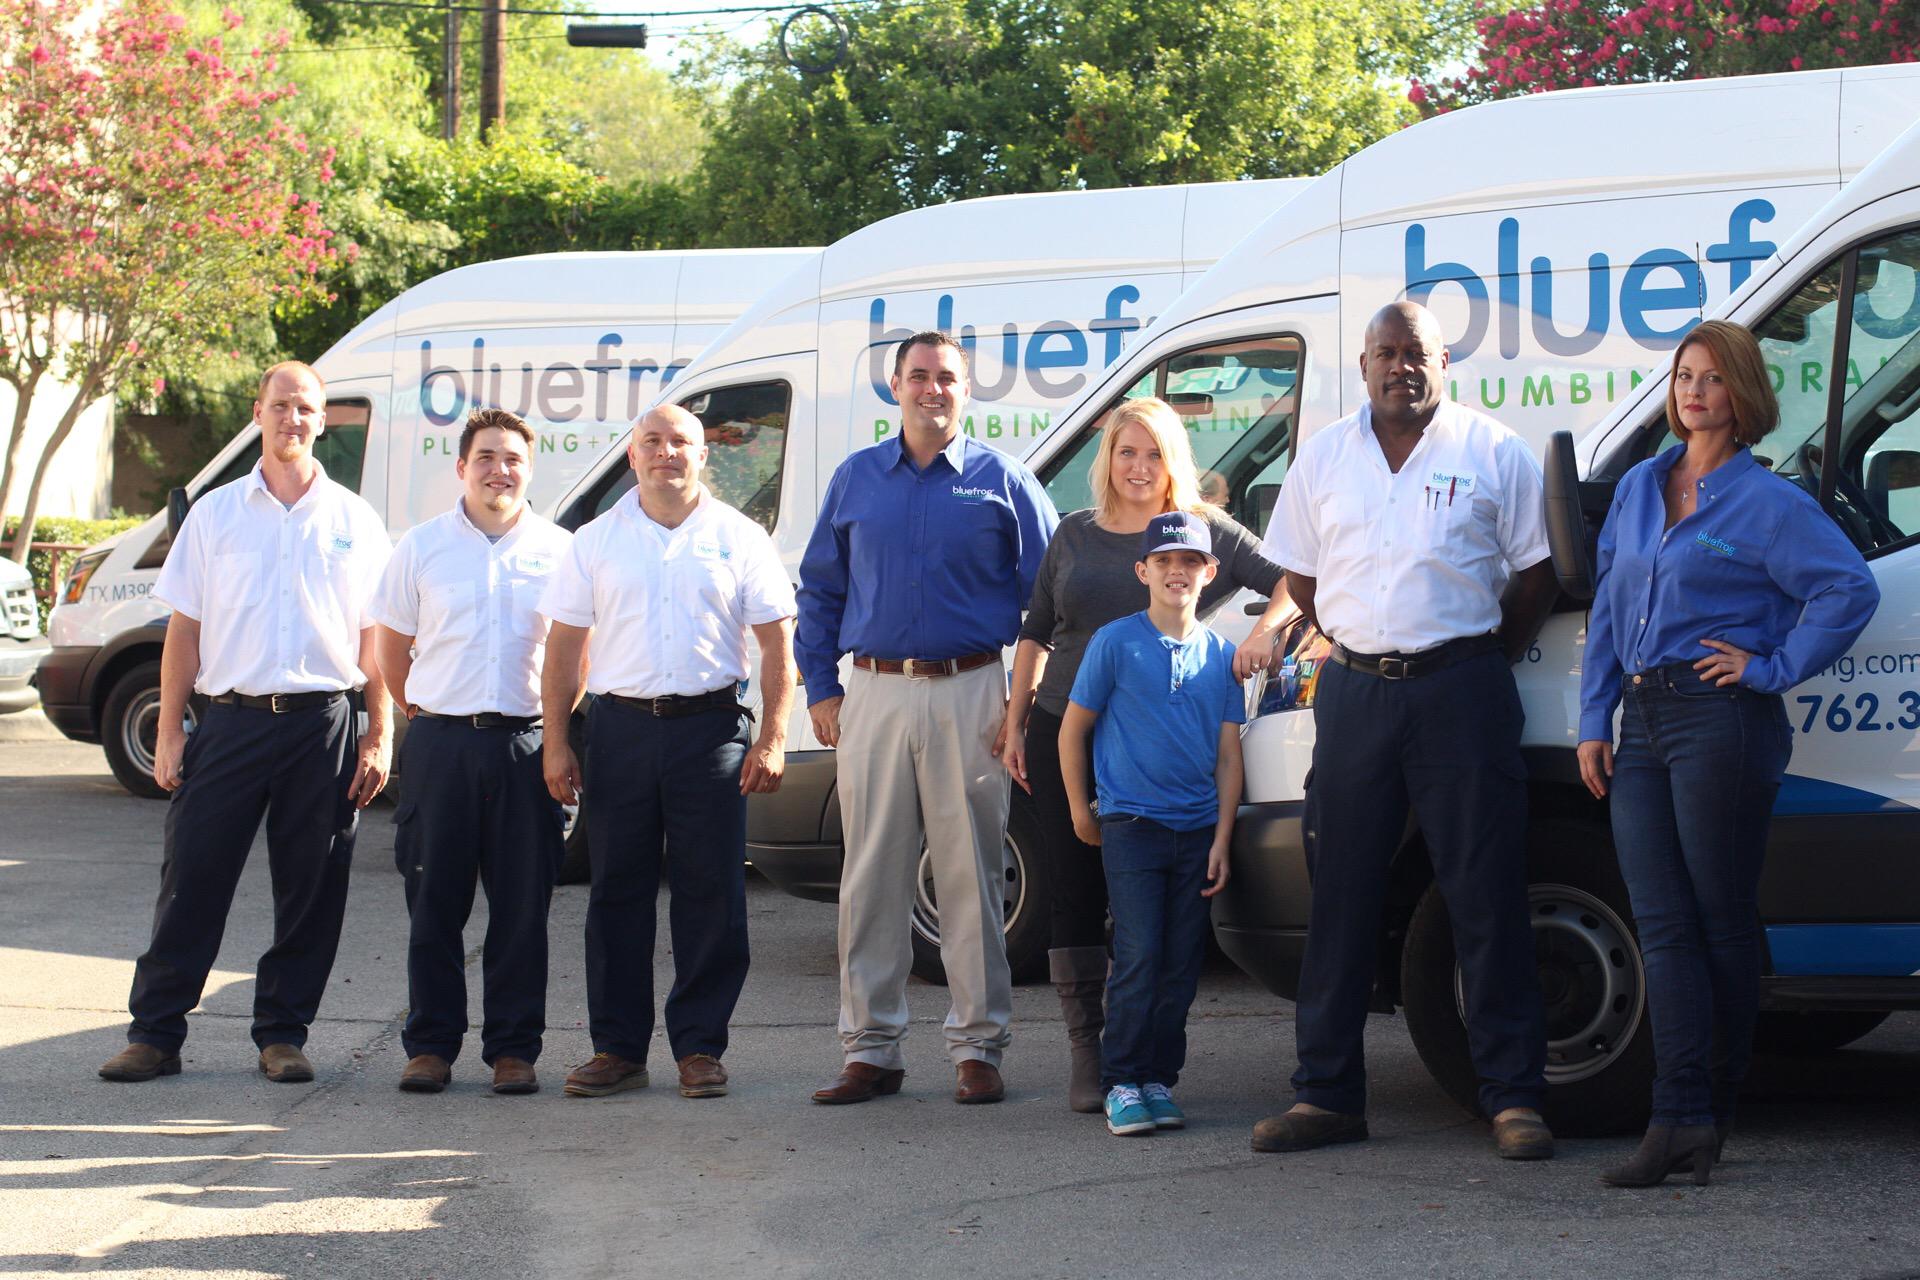 Some of the amazing team at bluefrog Plumbing + Drain of San Antonio ready for any of your plumber needs in the San Antonio, TX area.